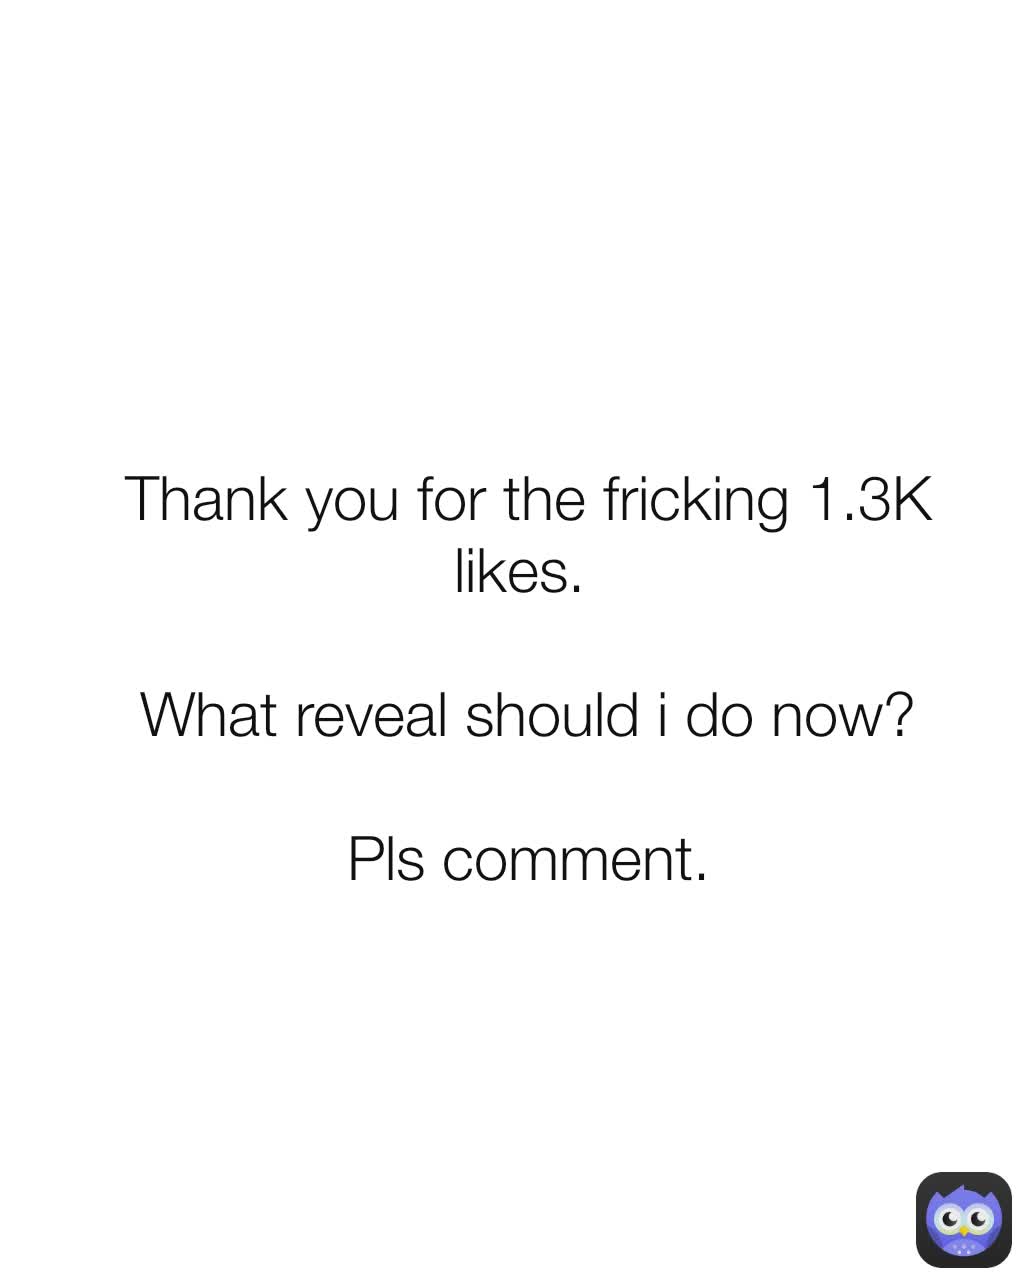 Thank you for the fricking 1.3K likes. 

What reveal should i do now?

Pls comment.